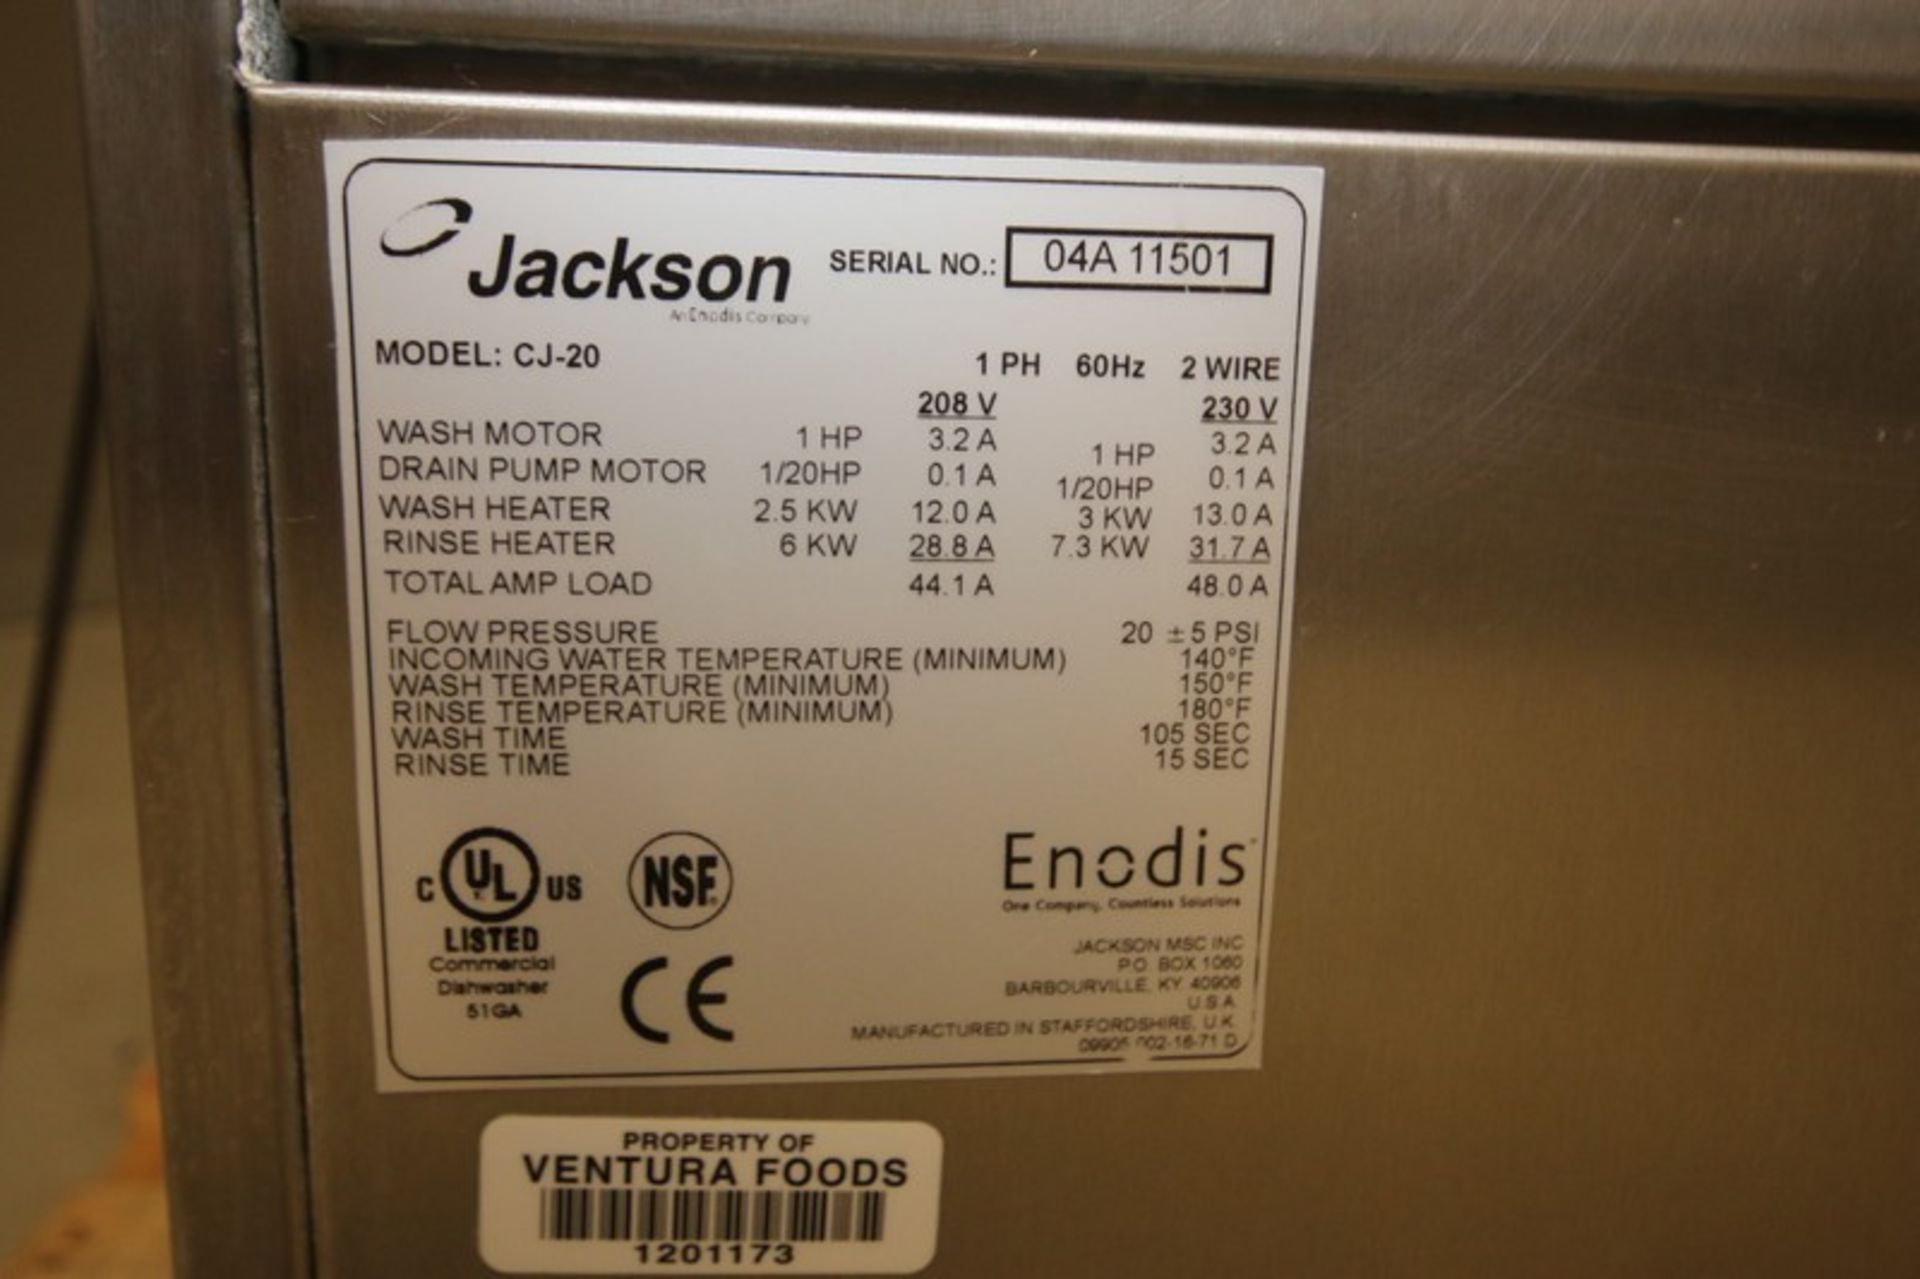 Jackson JPX-200 S/S Commericial Dish Wash Washer,Model CJ-20, SN 04A 11501, 208V (INV#80941)(Located - Image 4 of 4